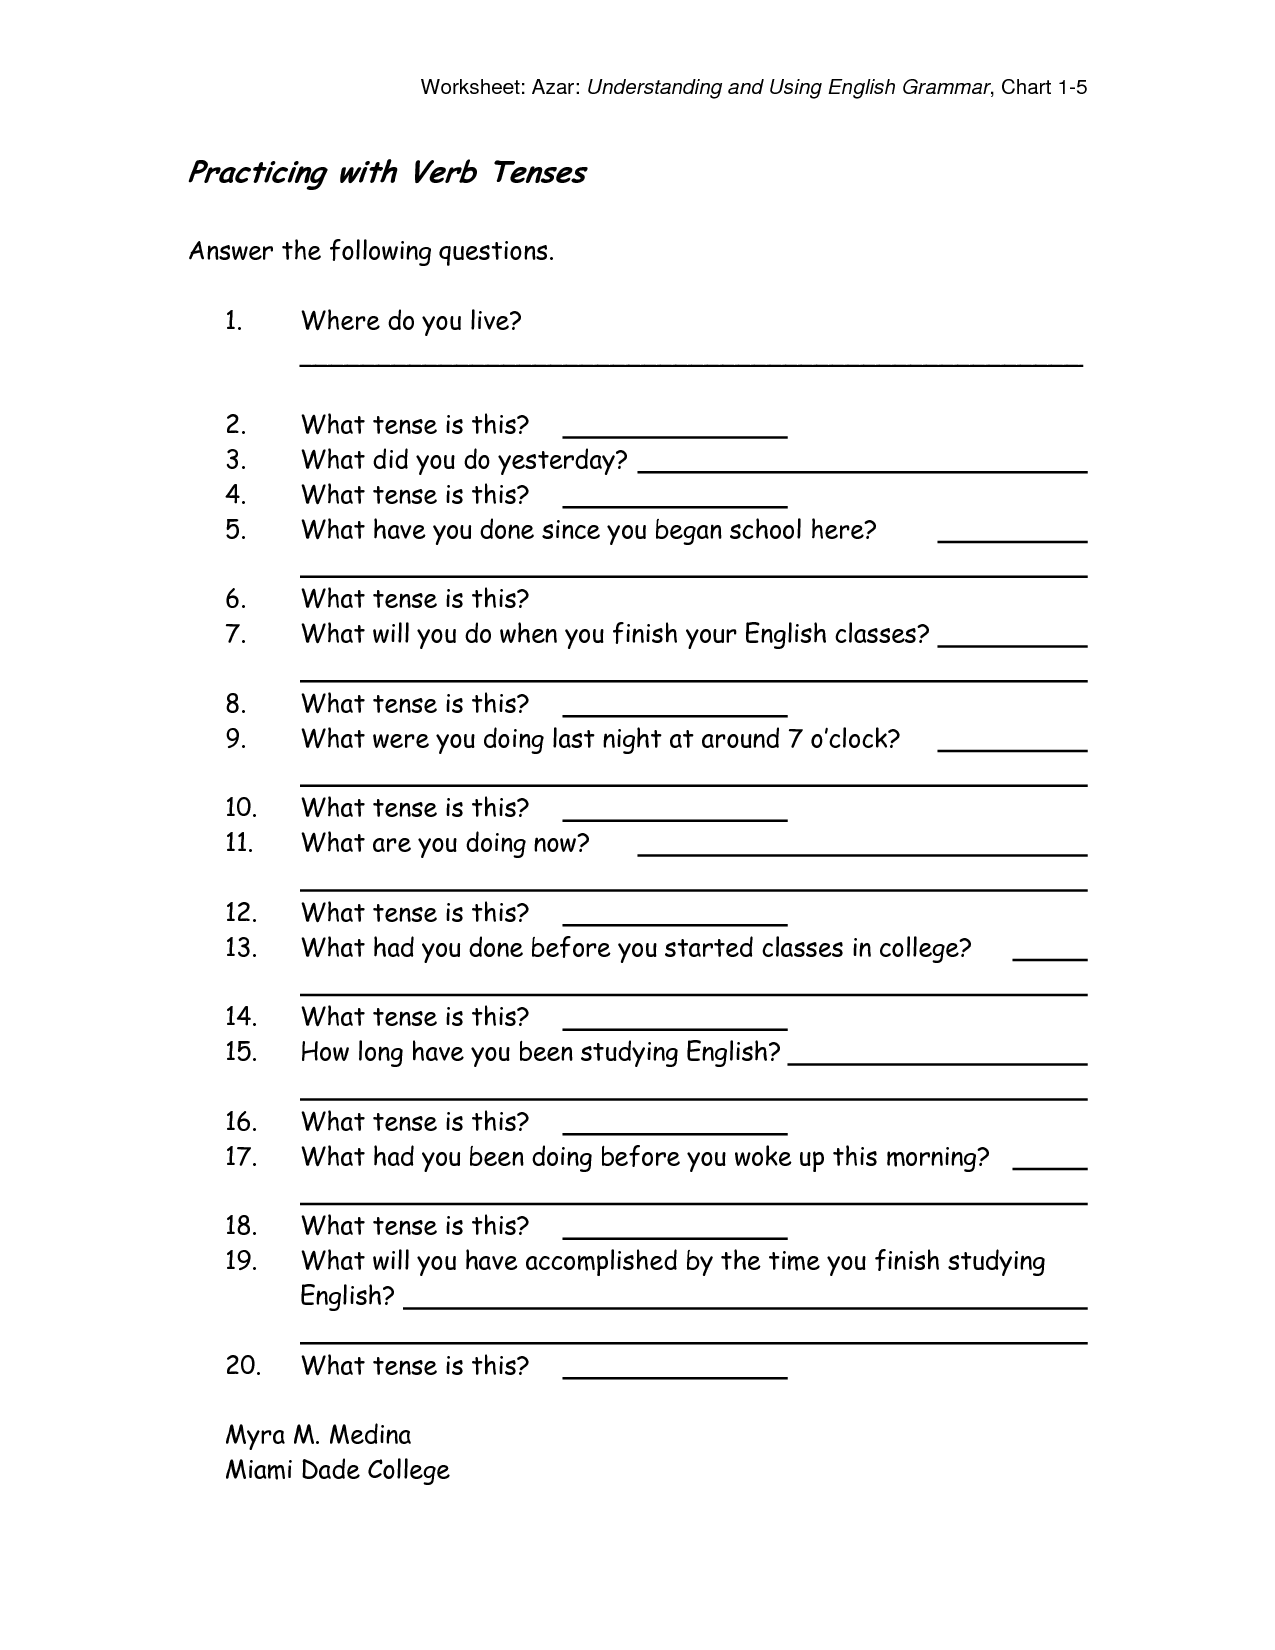 17-best-images-of-english-future-tense-worksheets-future-tense-worksheets-future-tense